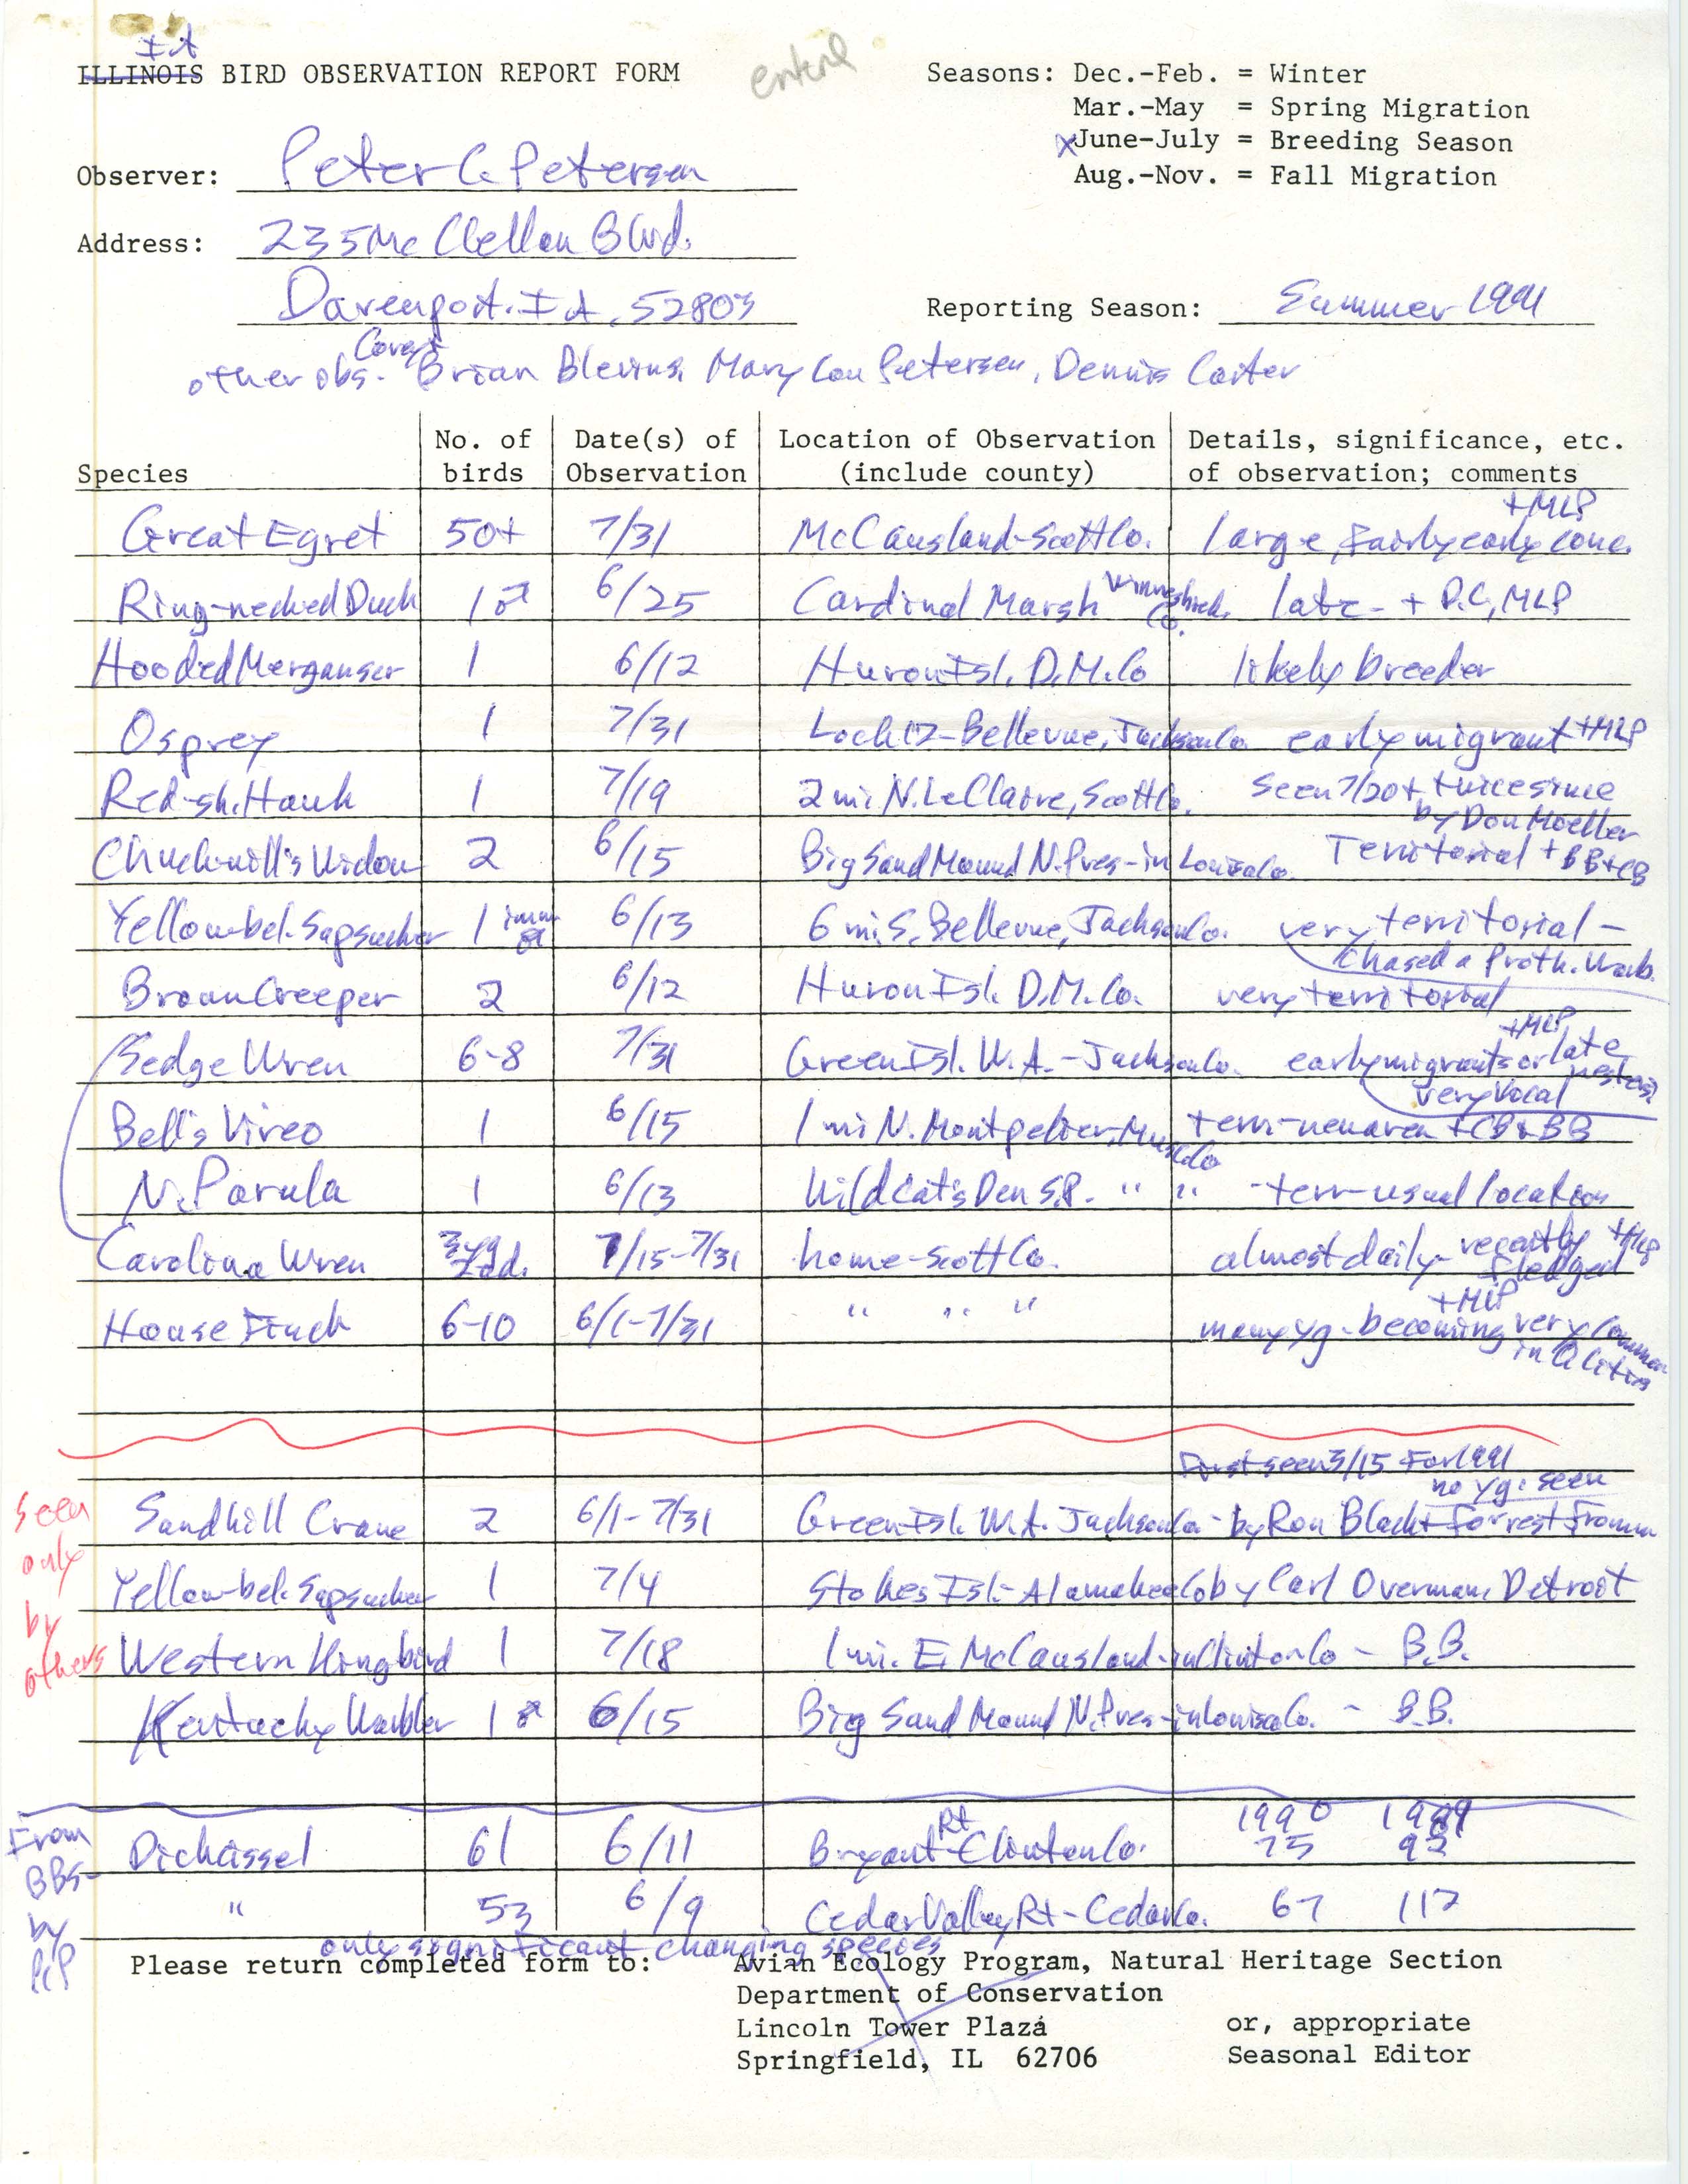 Field notes contributed by, Peter C. Petersen, summer 1991